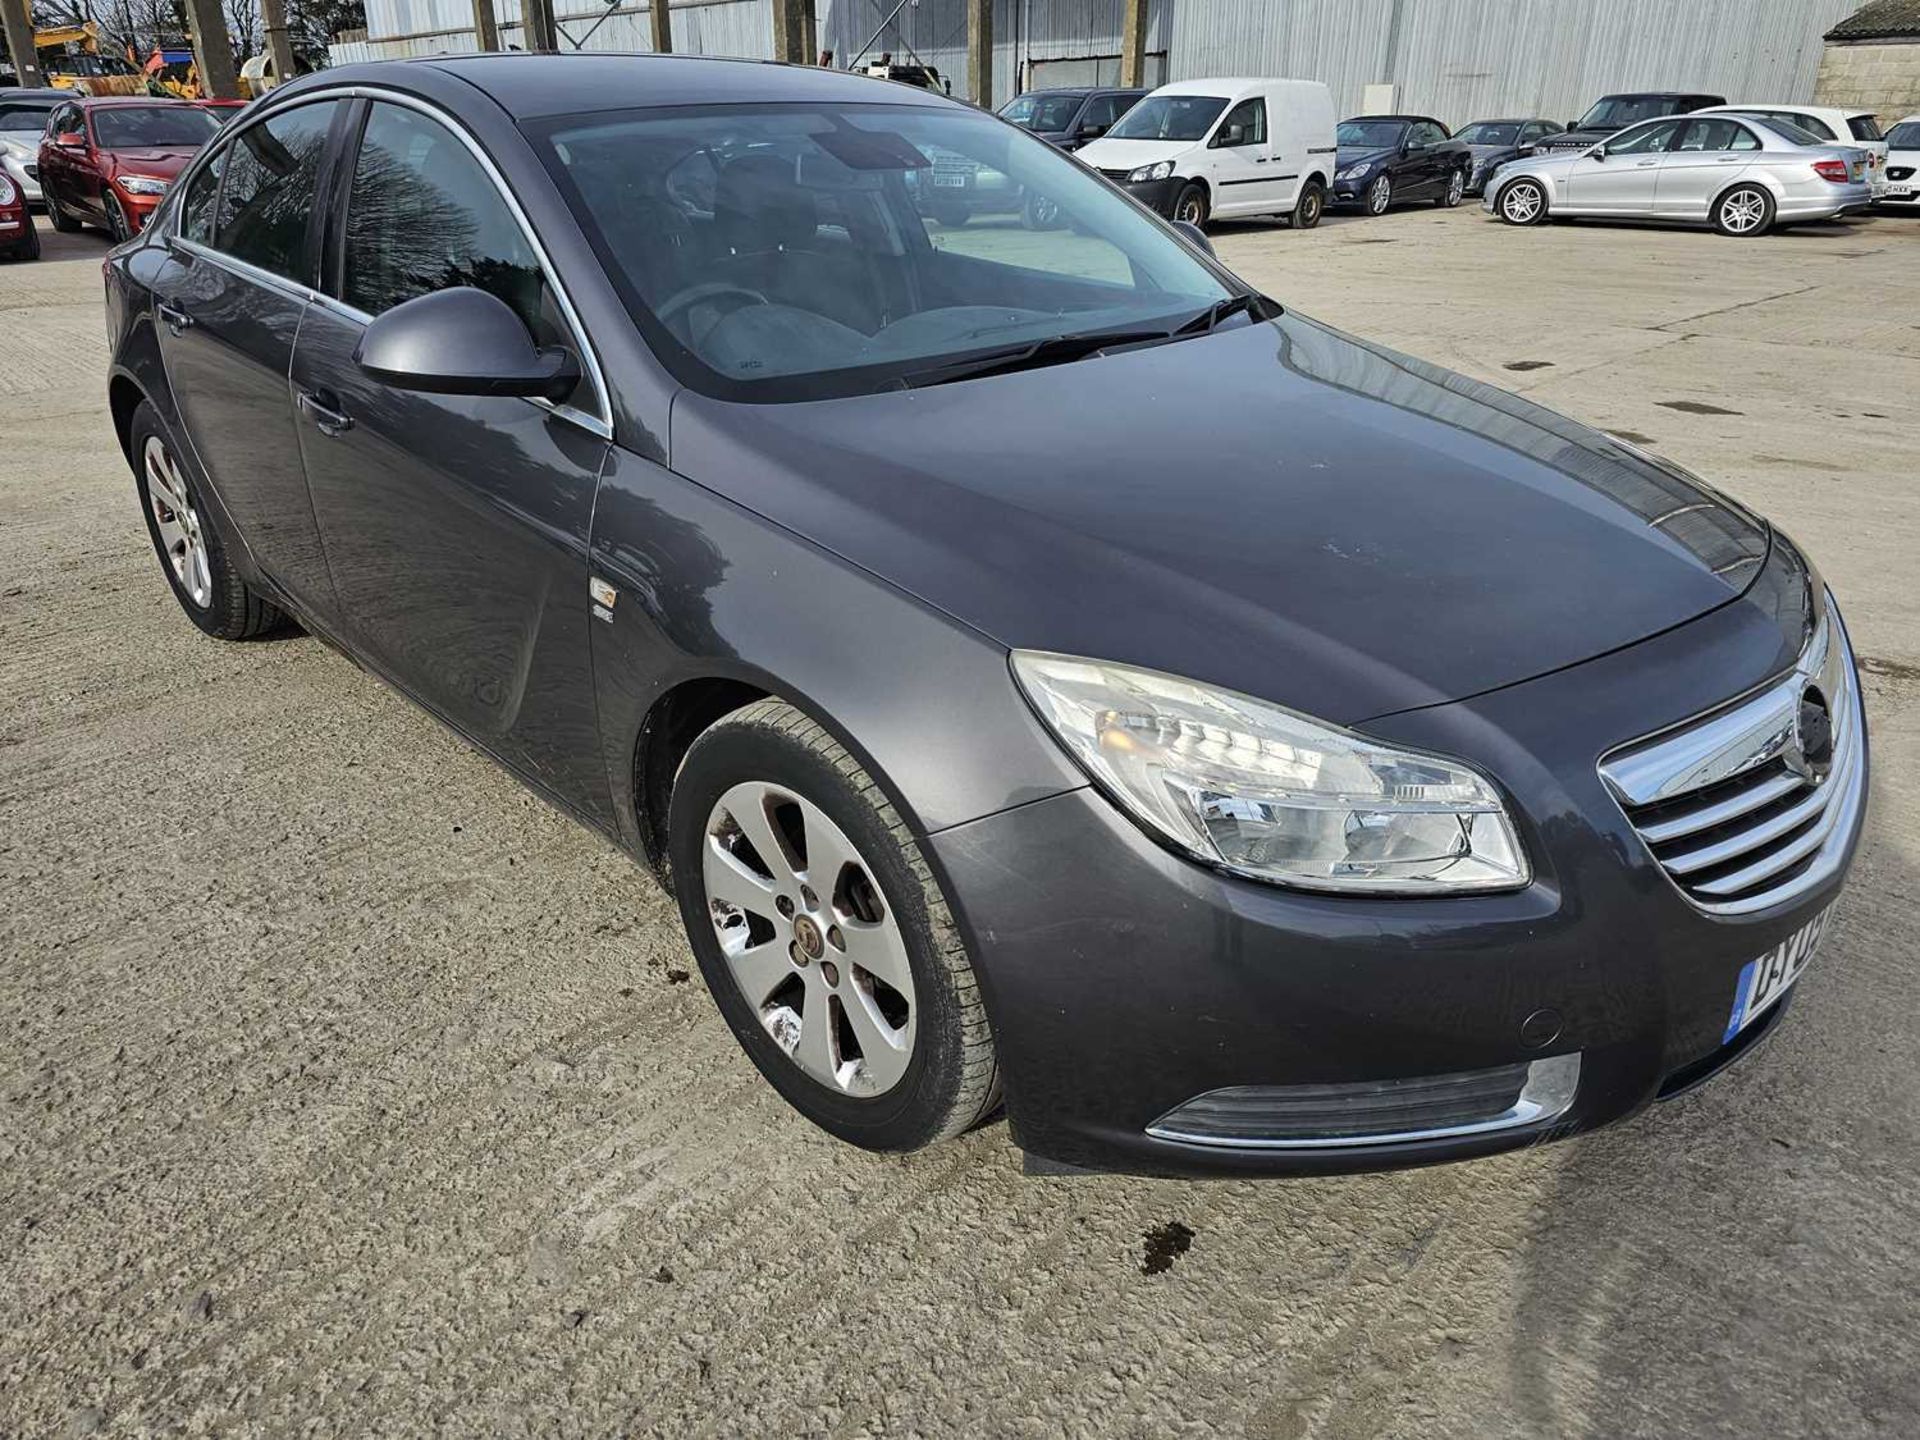 2009 Vauxhall Insignia, 6 Speed, Bluetooth, Cruise Control, Climate Control (Reg. Docs. Available, T - Image 7 of 28